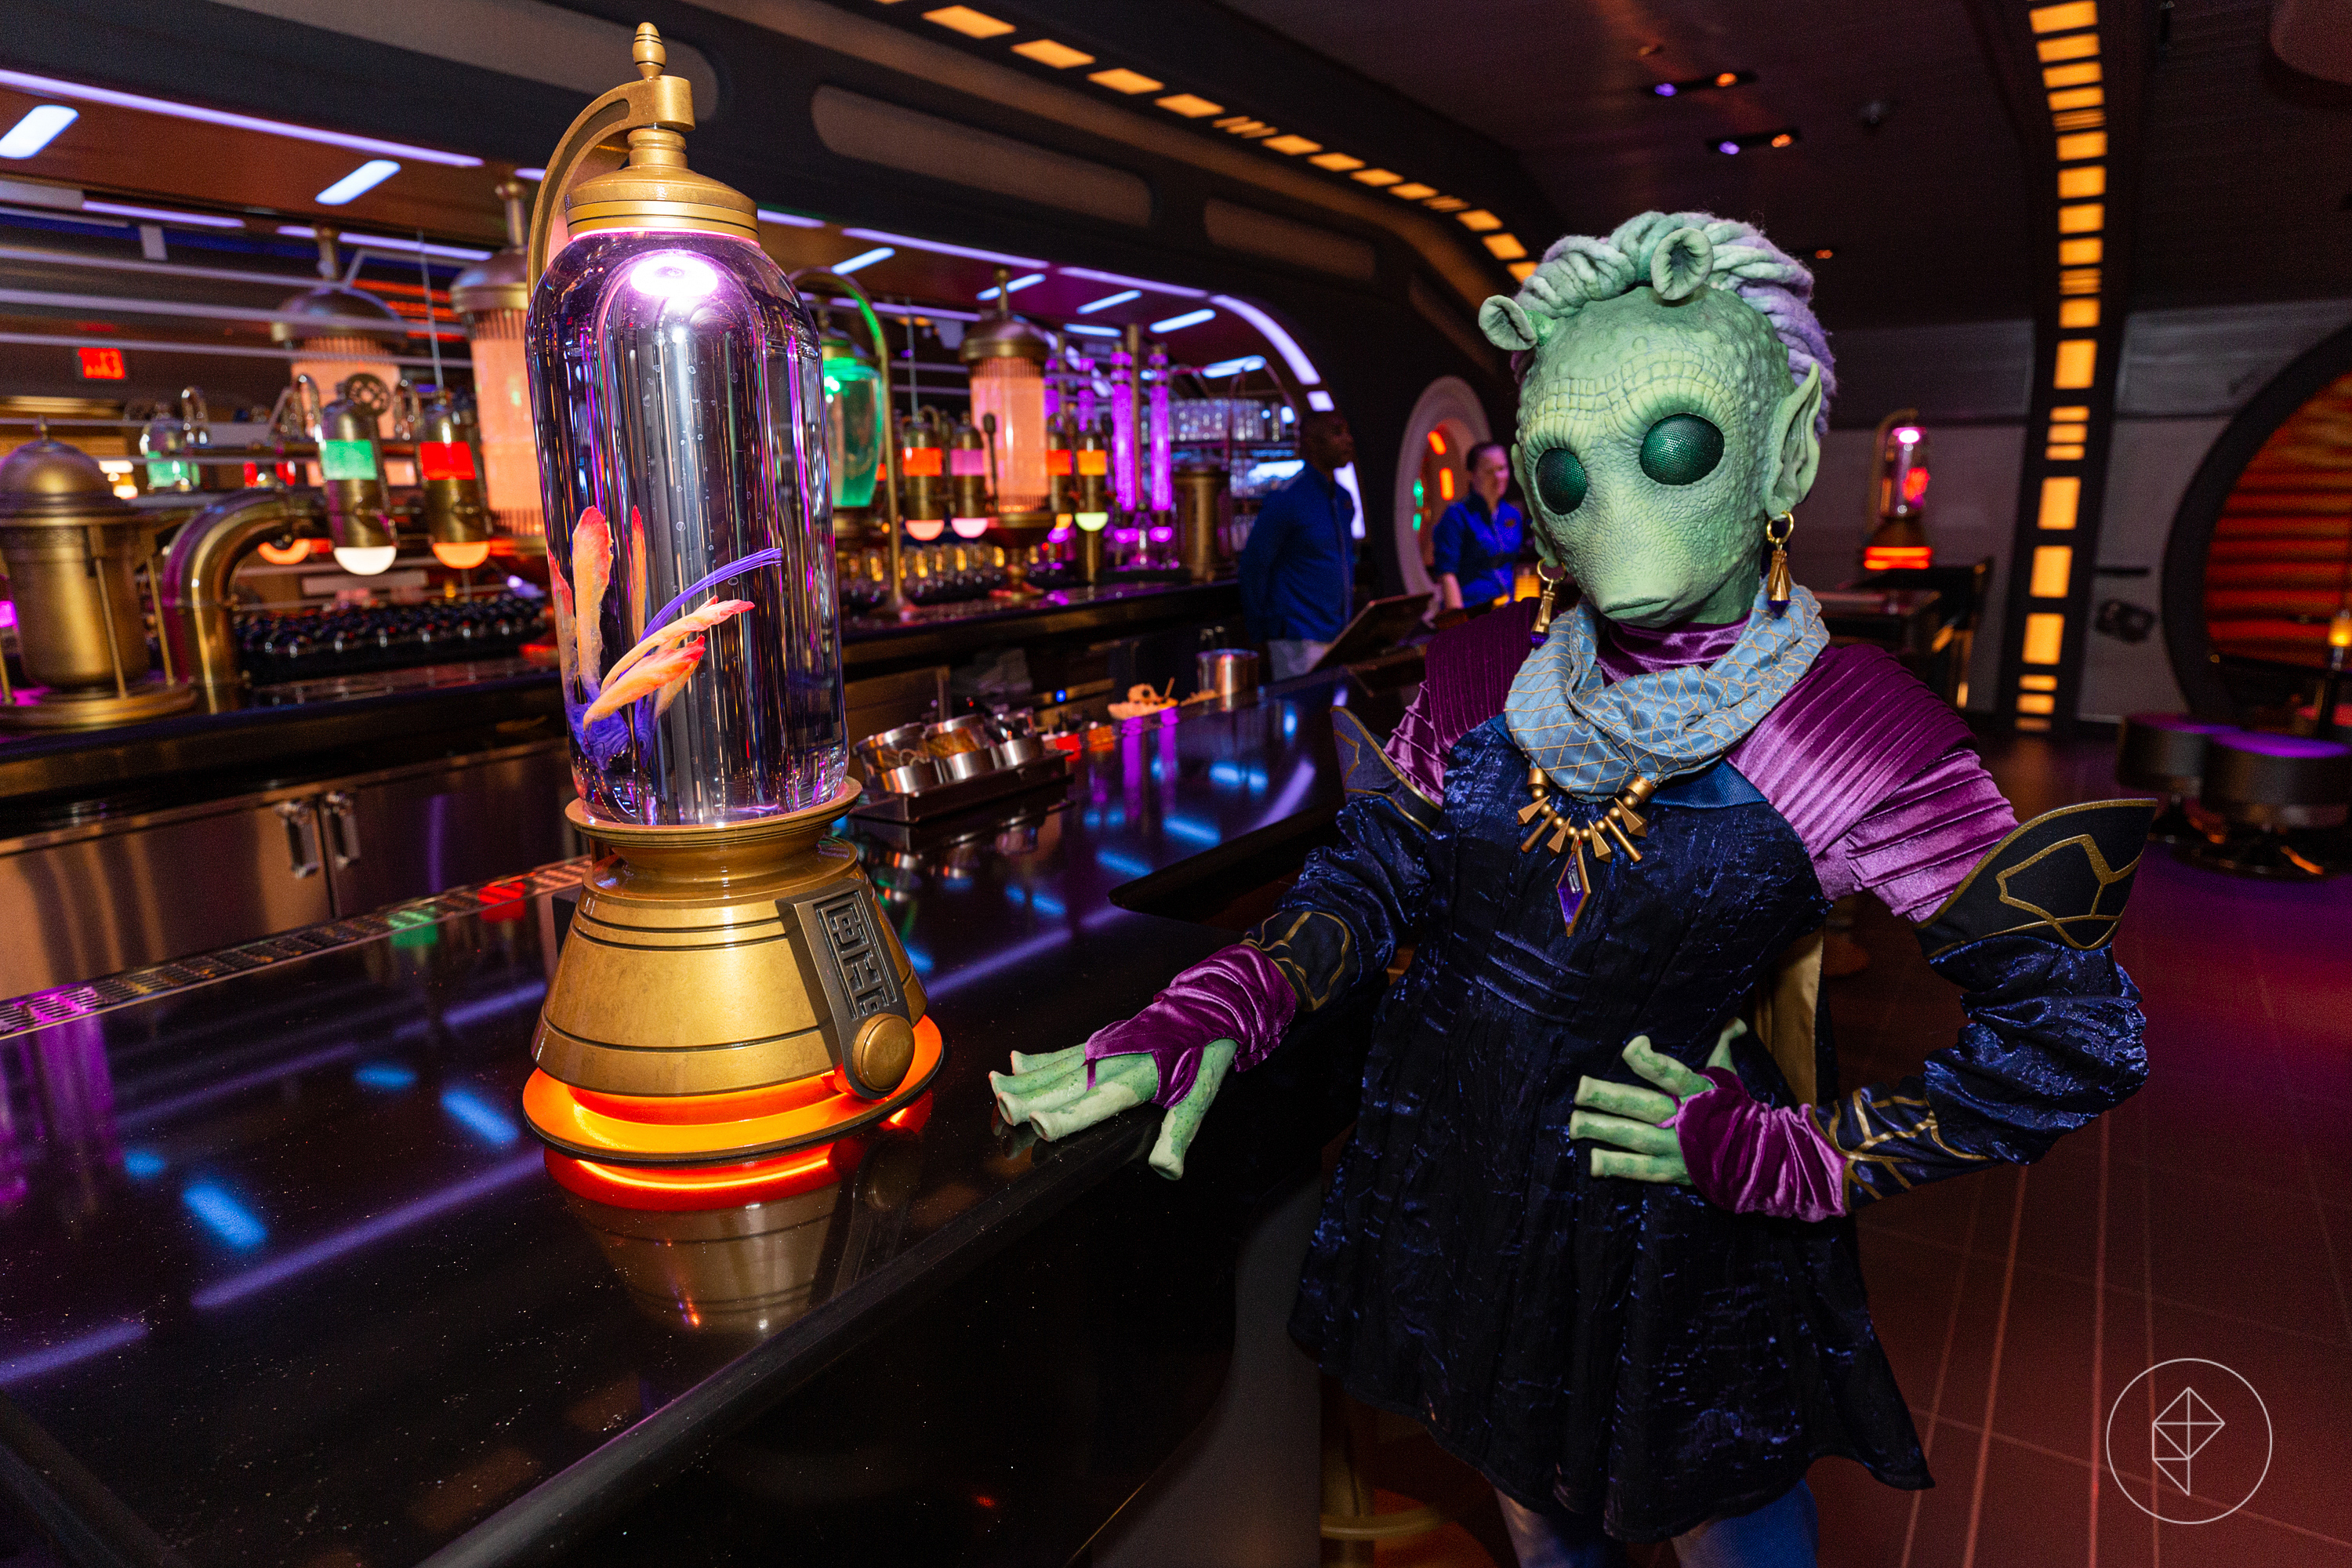 A woman in a green alien costume poses by a lavish bar, trimmed in gold and neon, in Disney’s Galactic Starcruiser